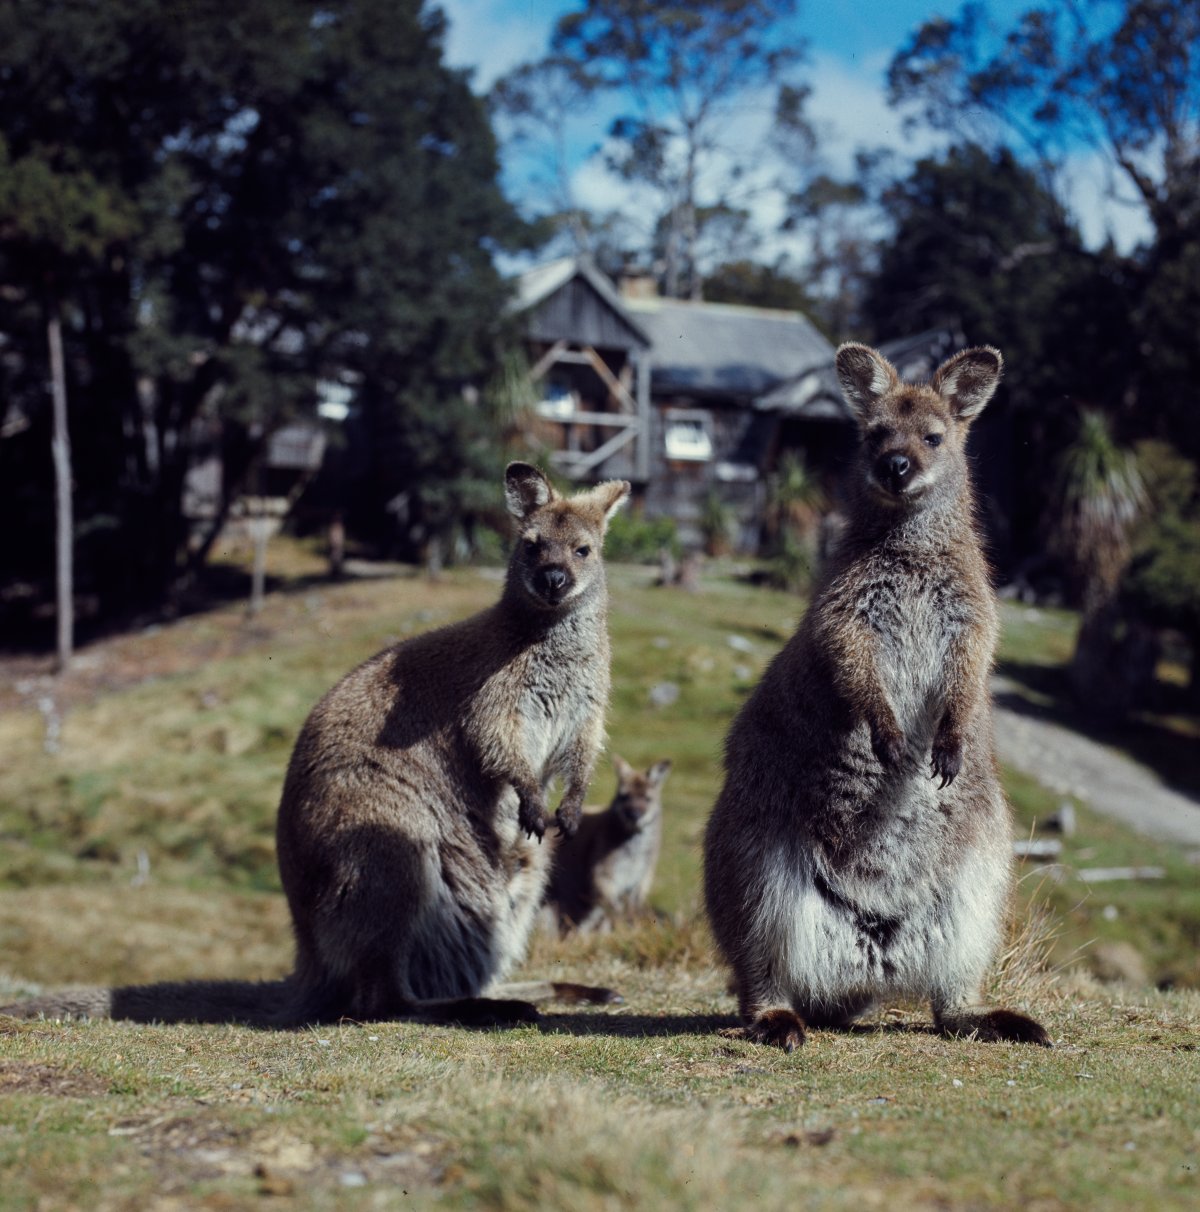 Two wallabies stand on a grassy hill. They are surrounded by bush and grassland. In the background a wooden cabin can be seen, along with other wallabies